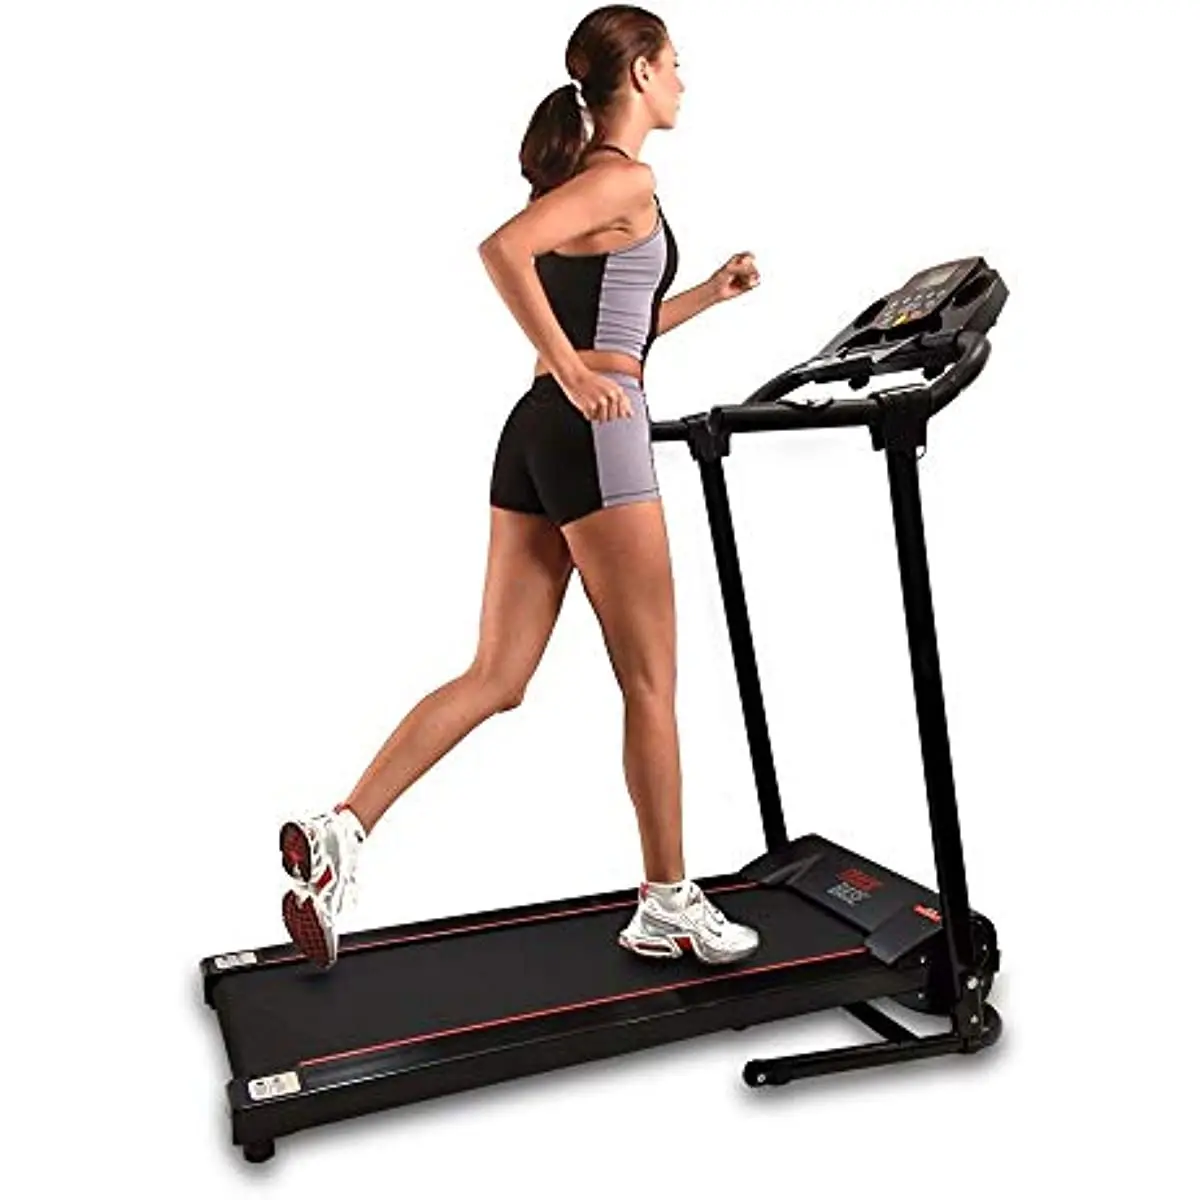 

Foldable Home Fitness Equipment with LCD for Walking & Running - Cardio Exercise Machine - 12 Preset or Adjustable Programs